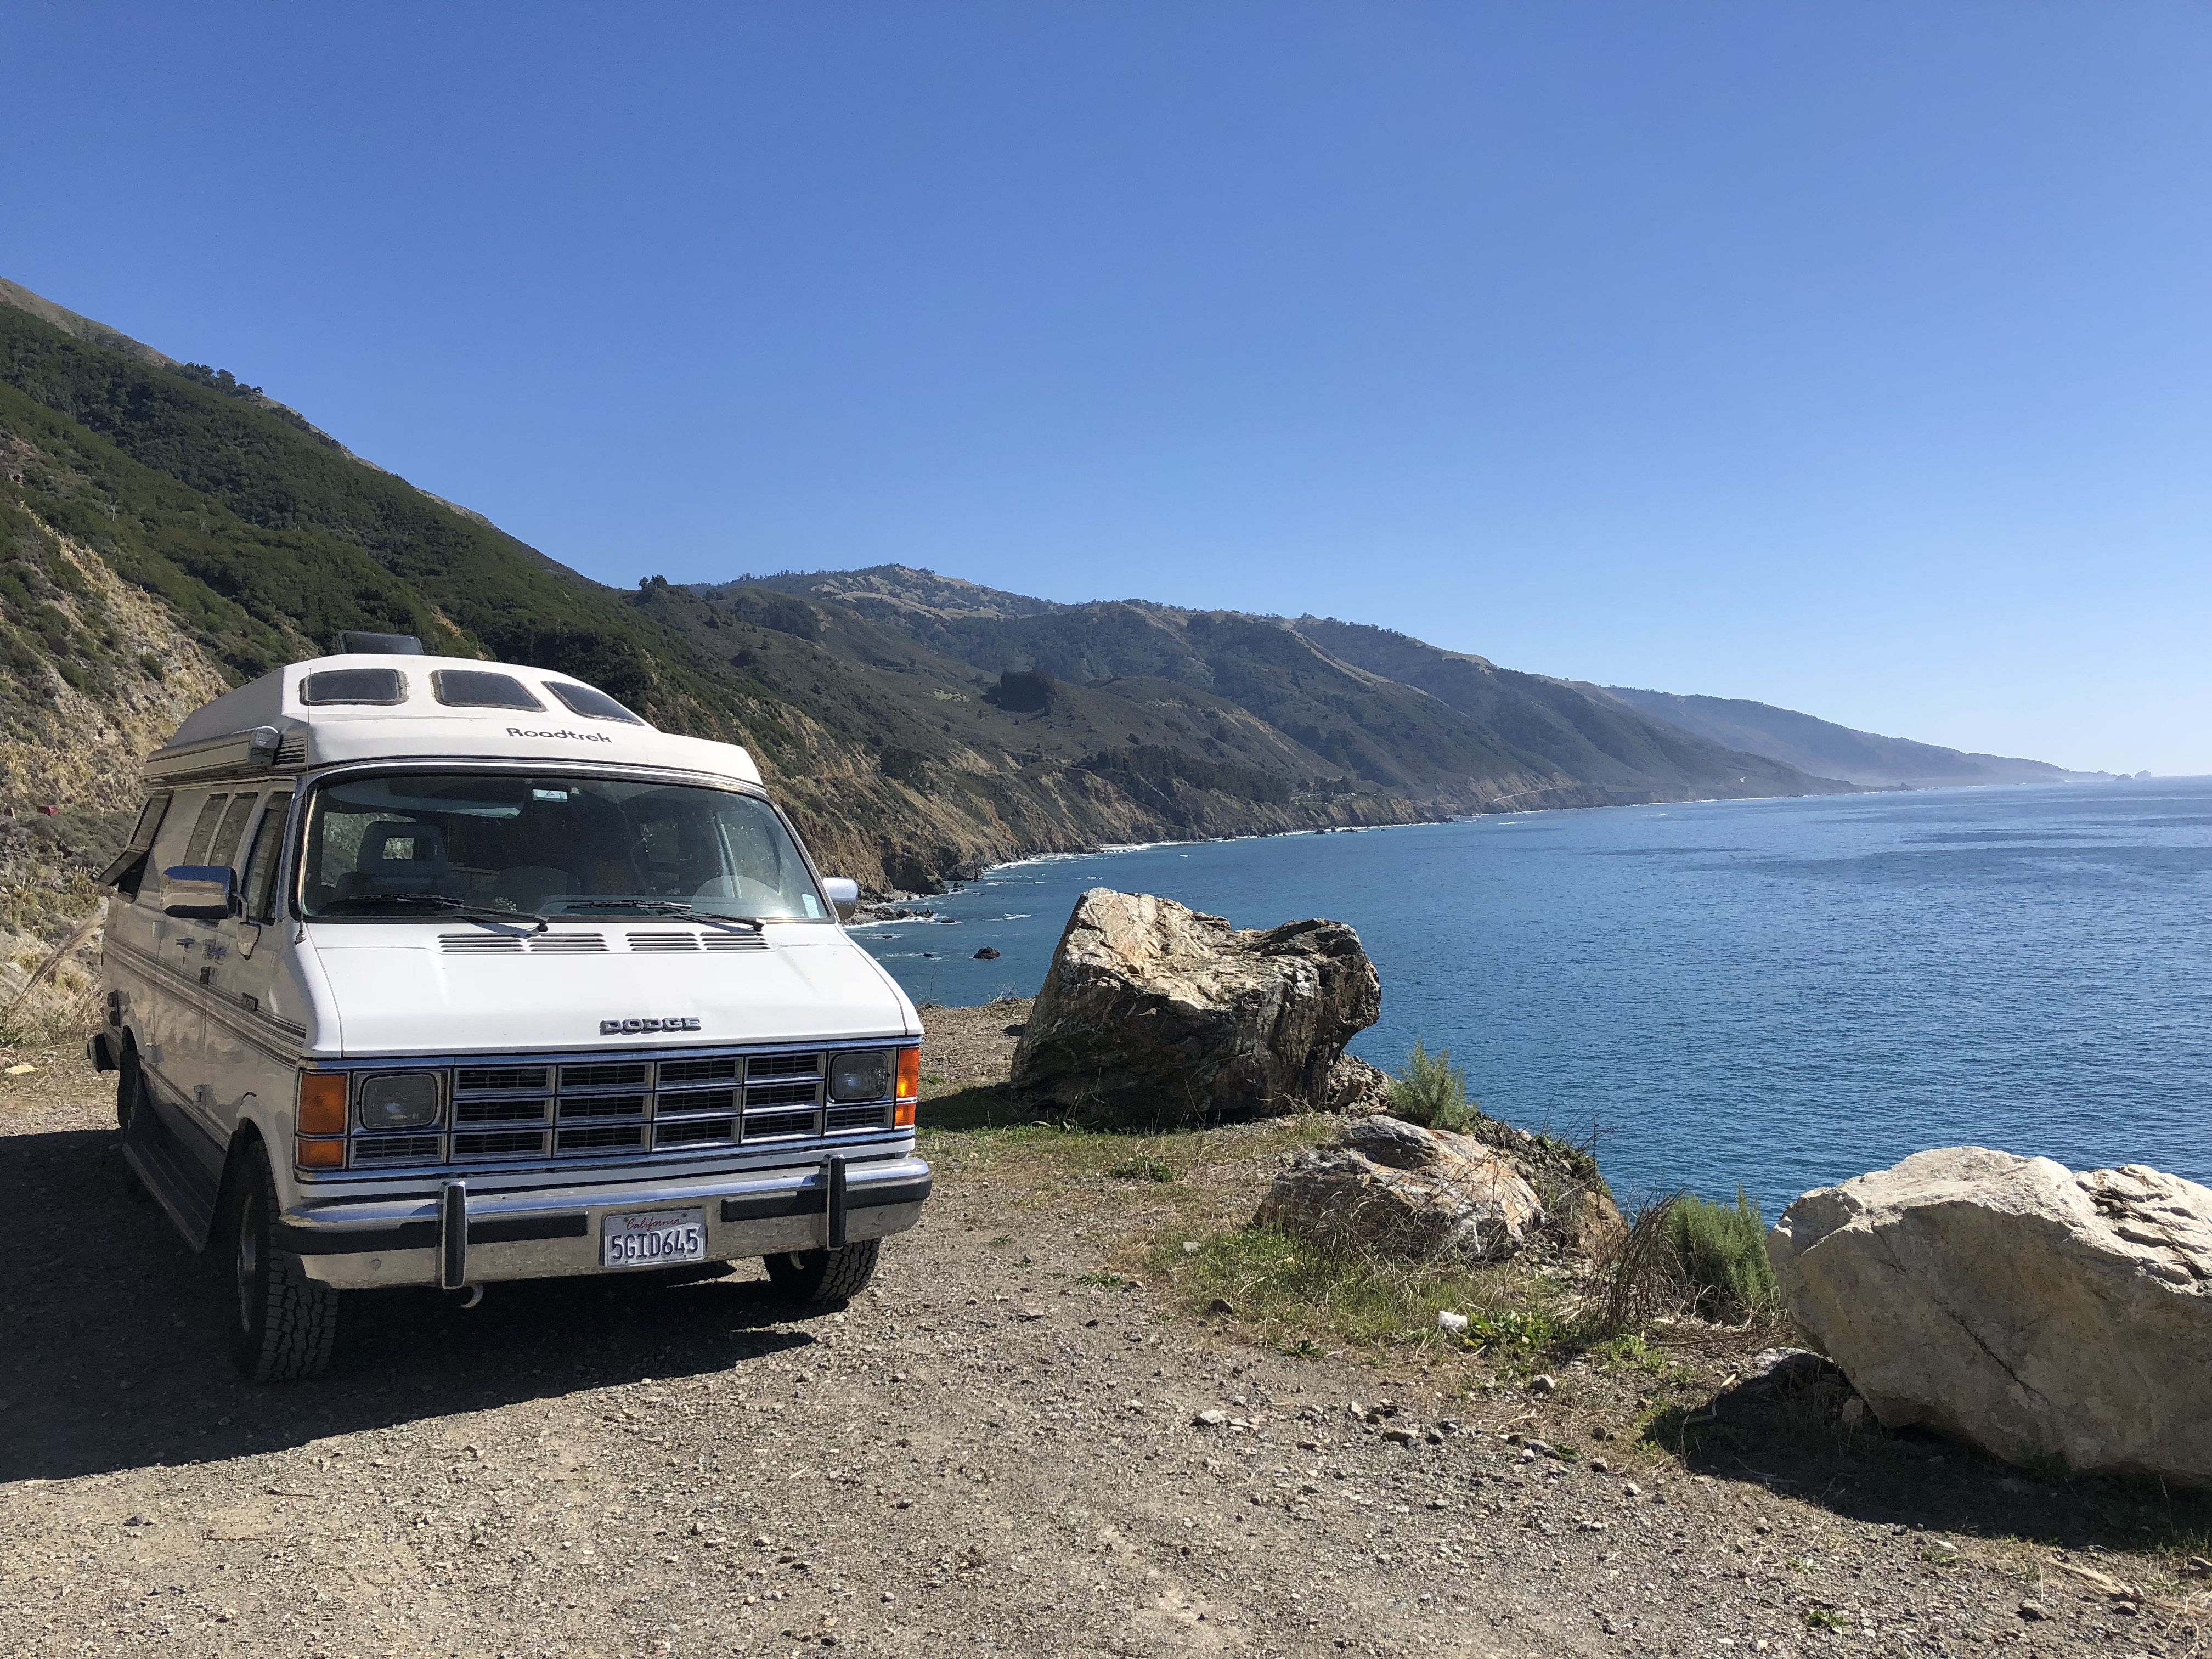 A van parked in a turnout on Highway 1